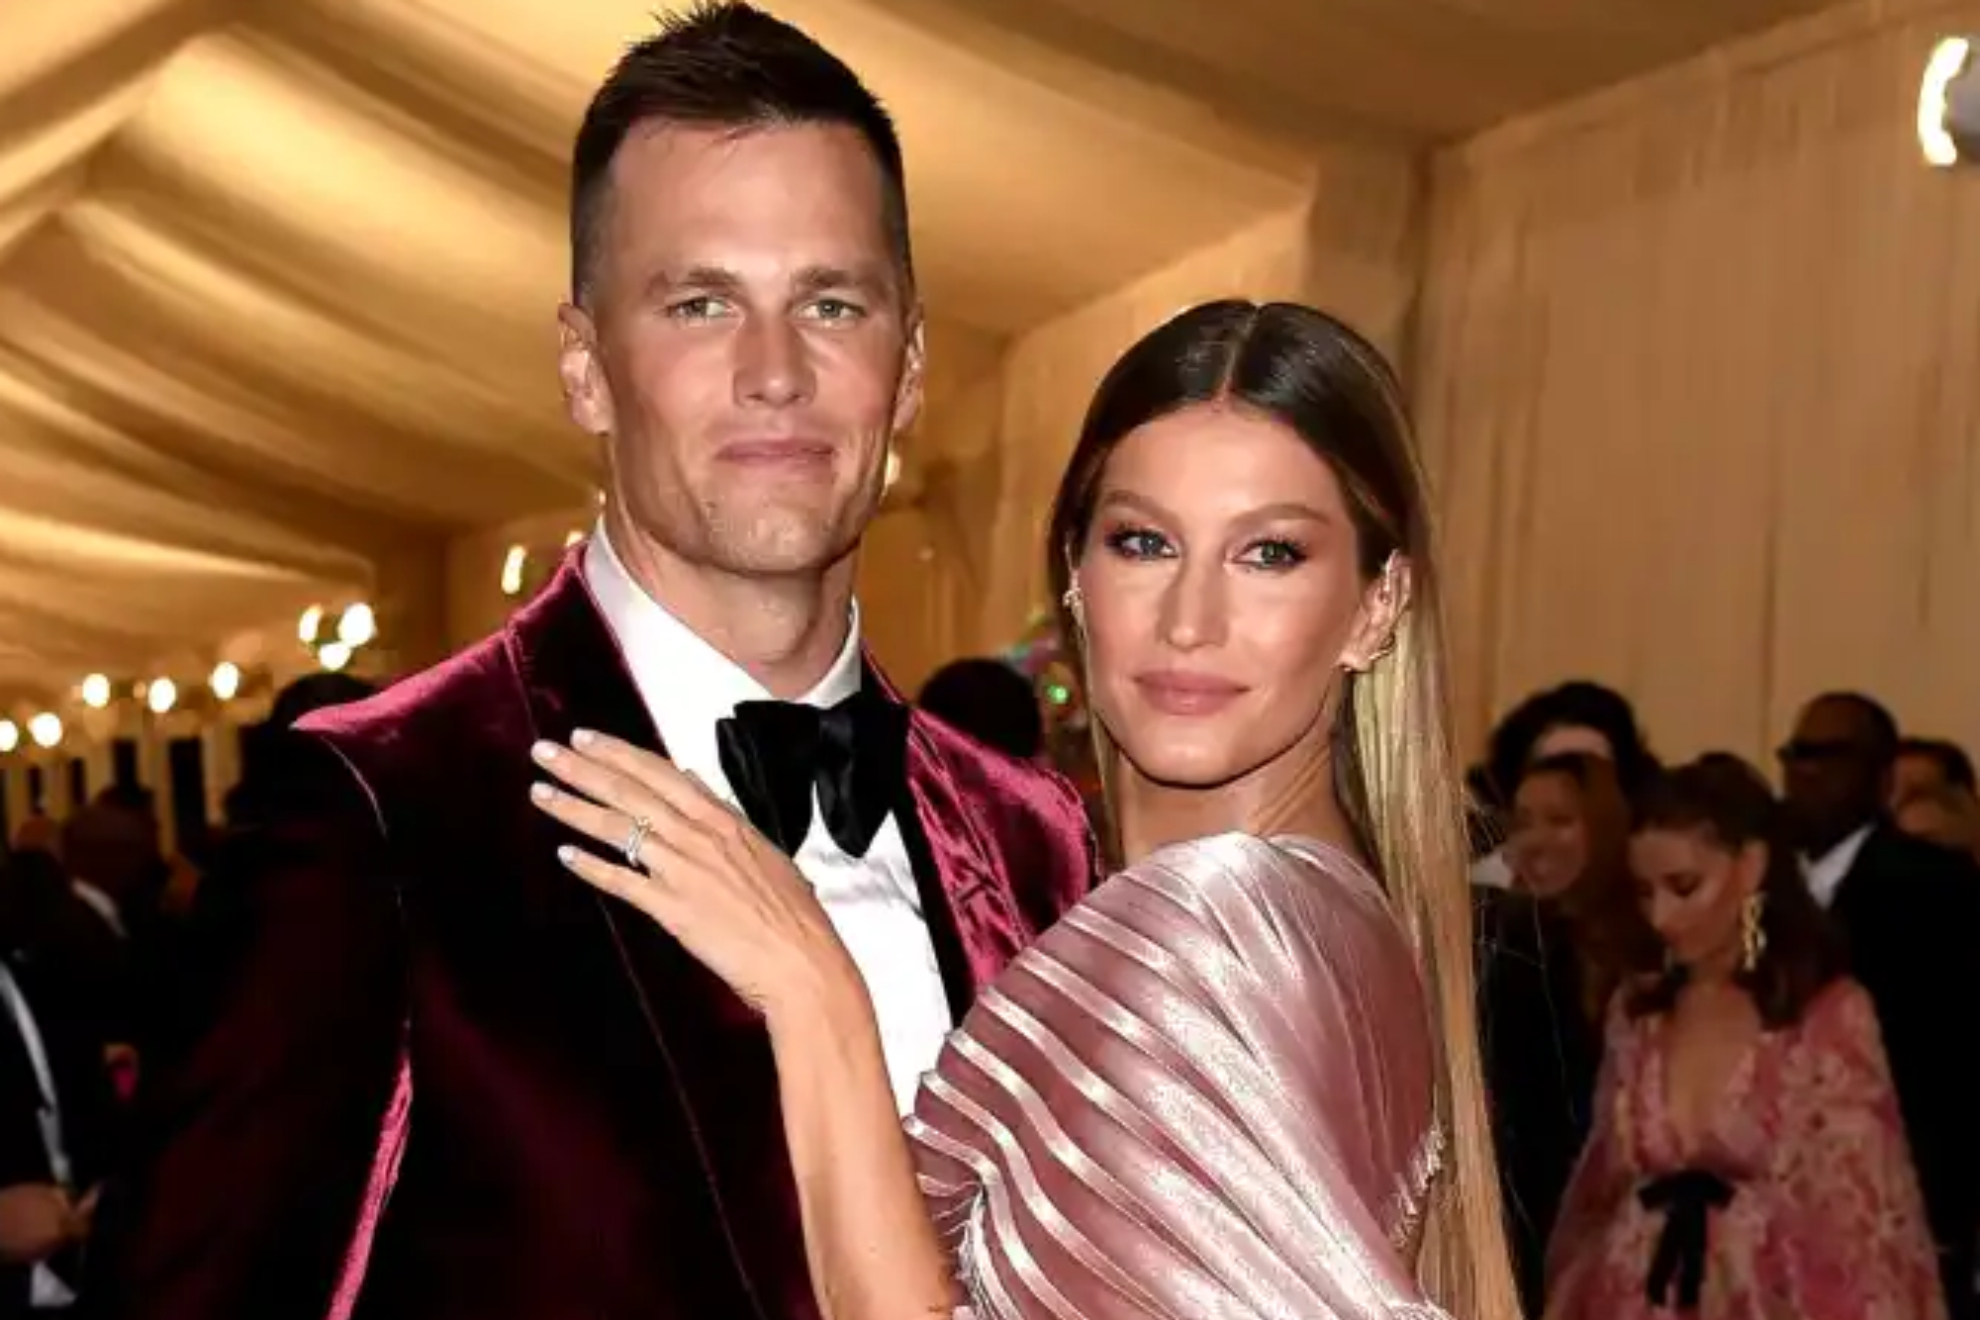 Tom Brady vs Gisele Bündchen: The scandal that could destroy the QB's  career in a way deflategate didn't